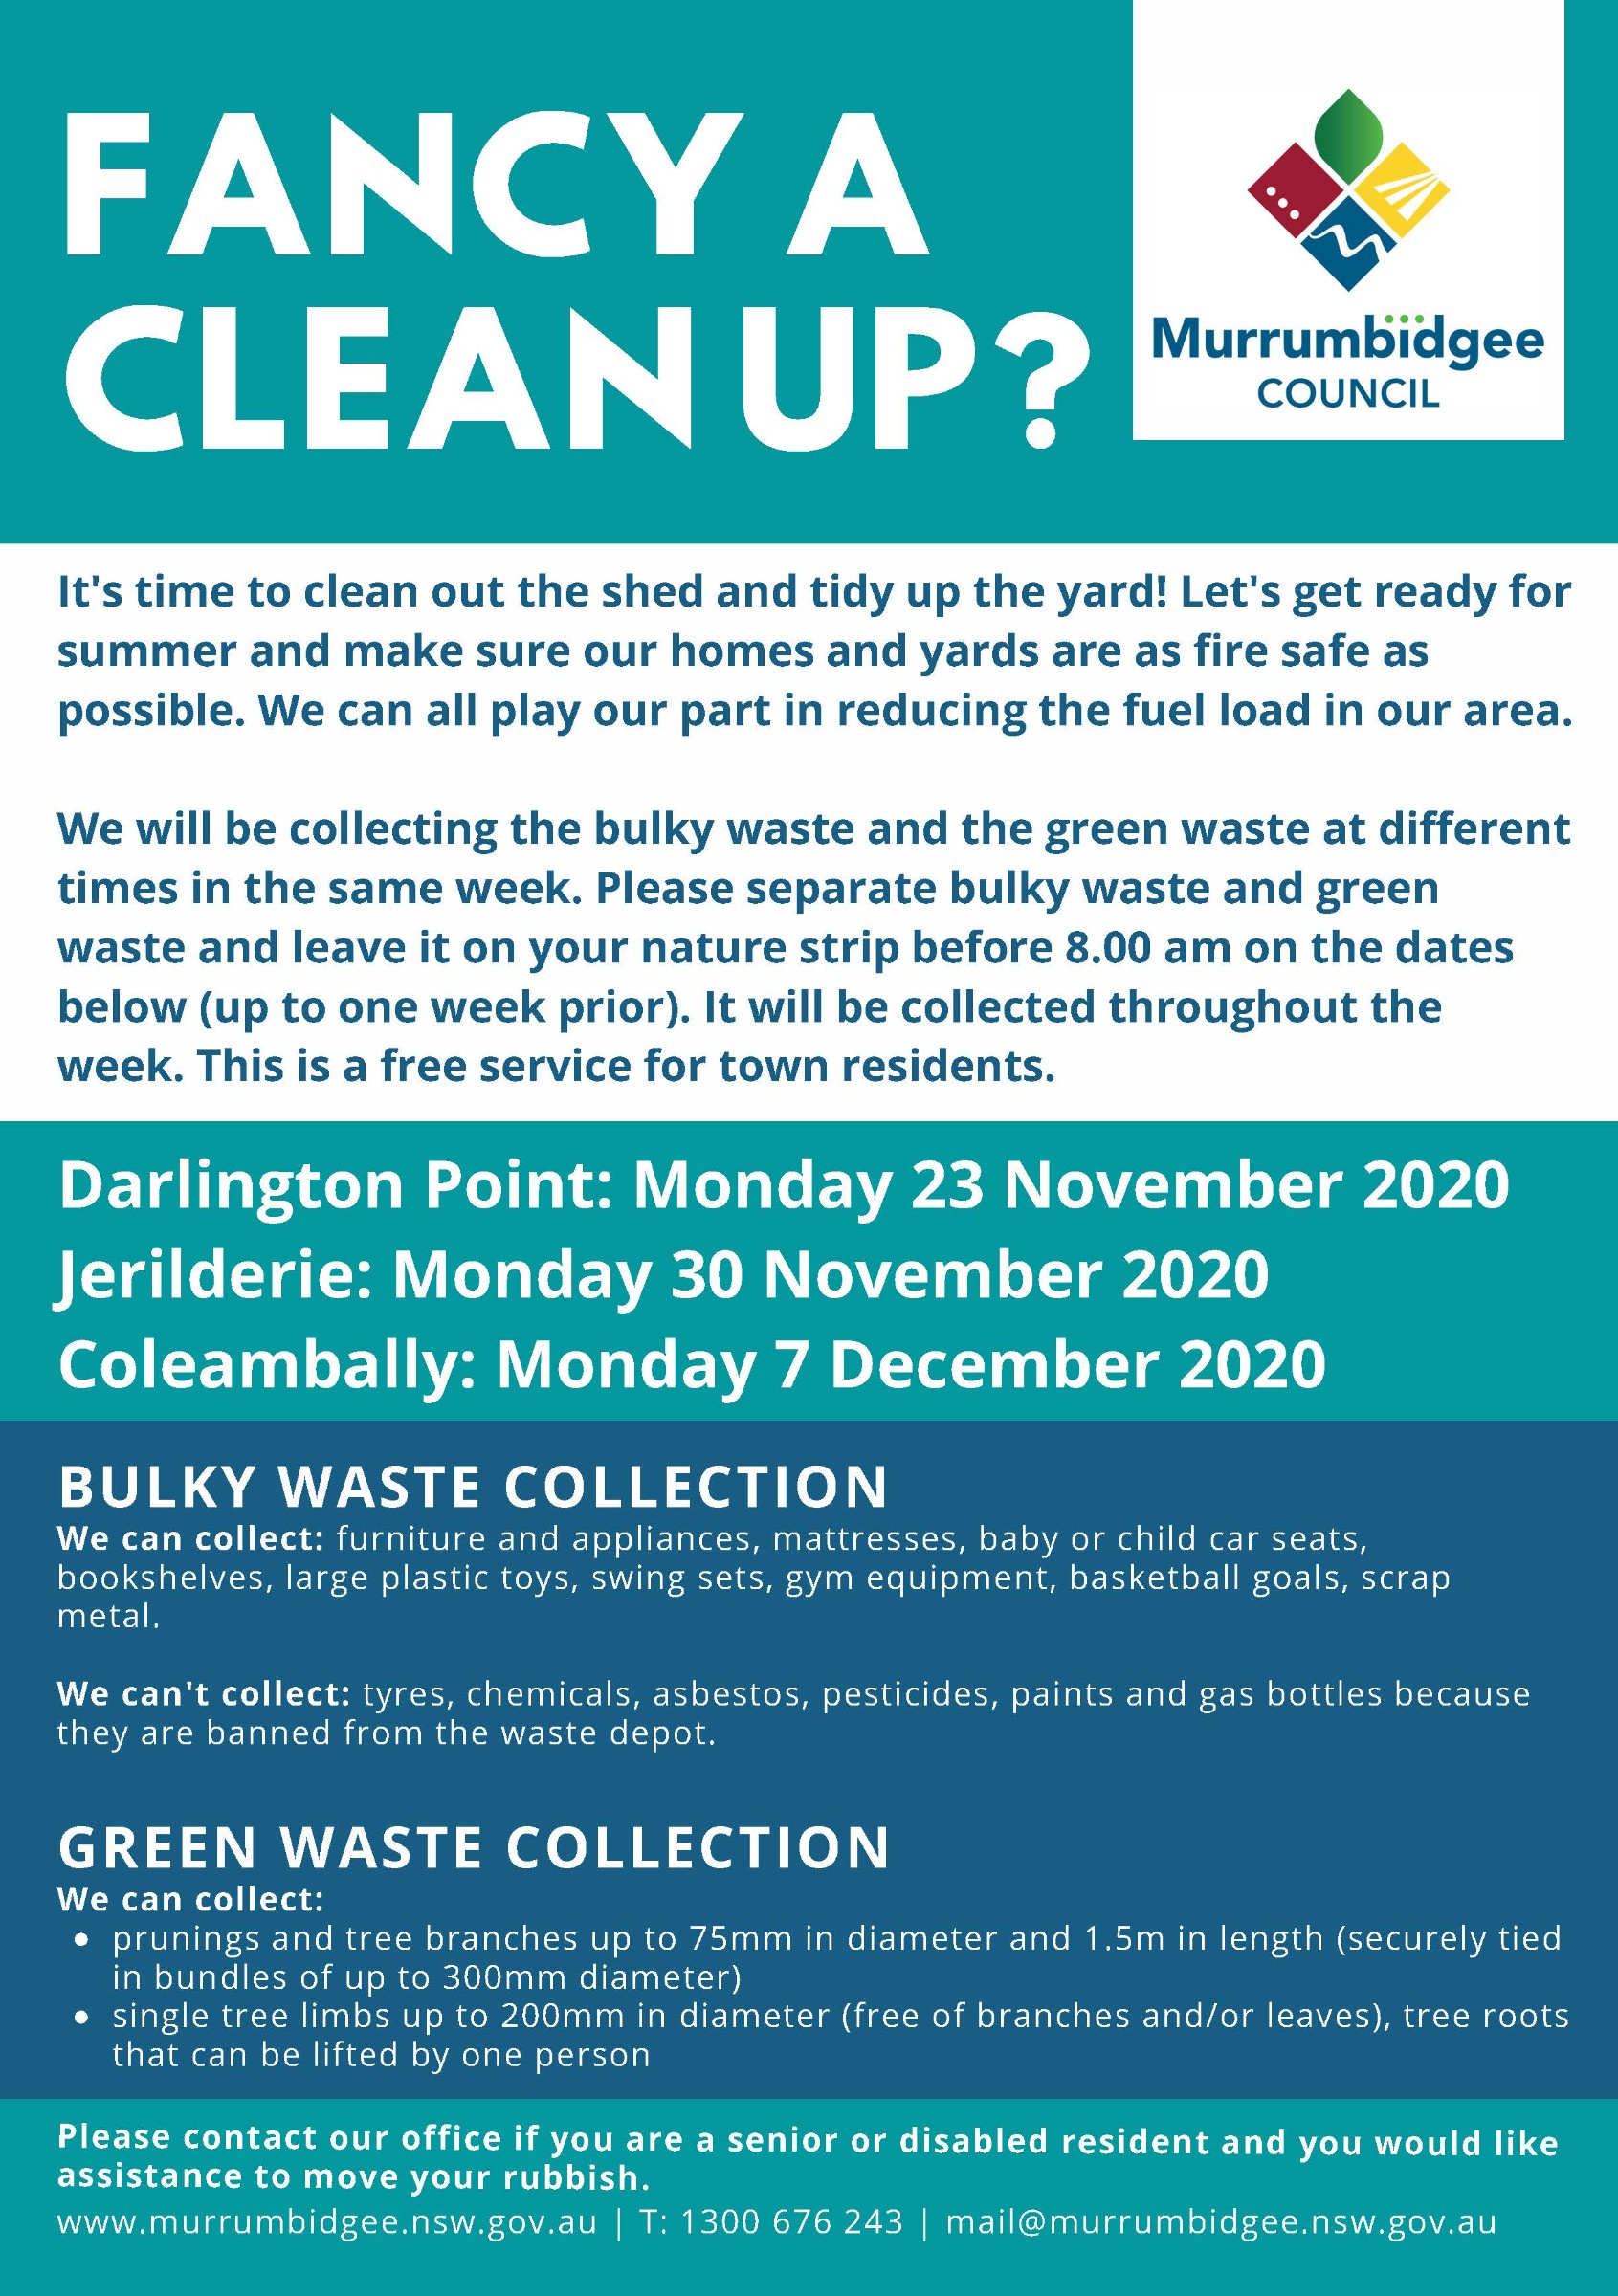 Bulky waste and green waste collections - Coleambally